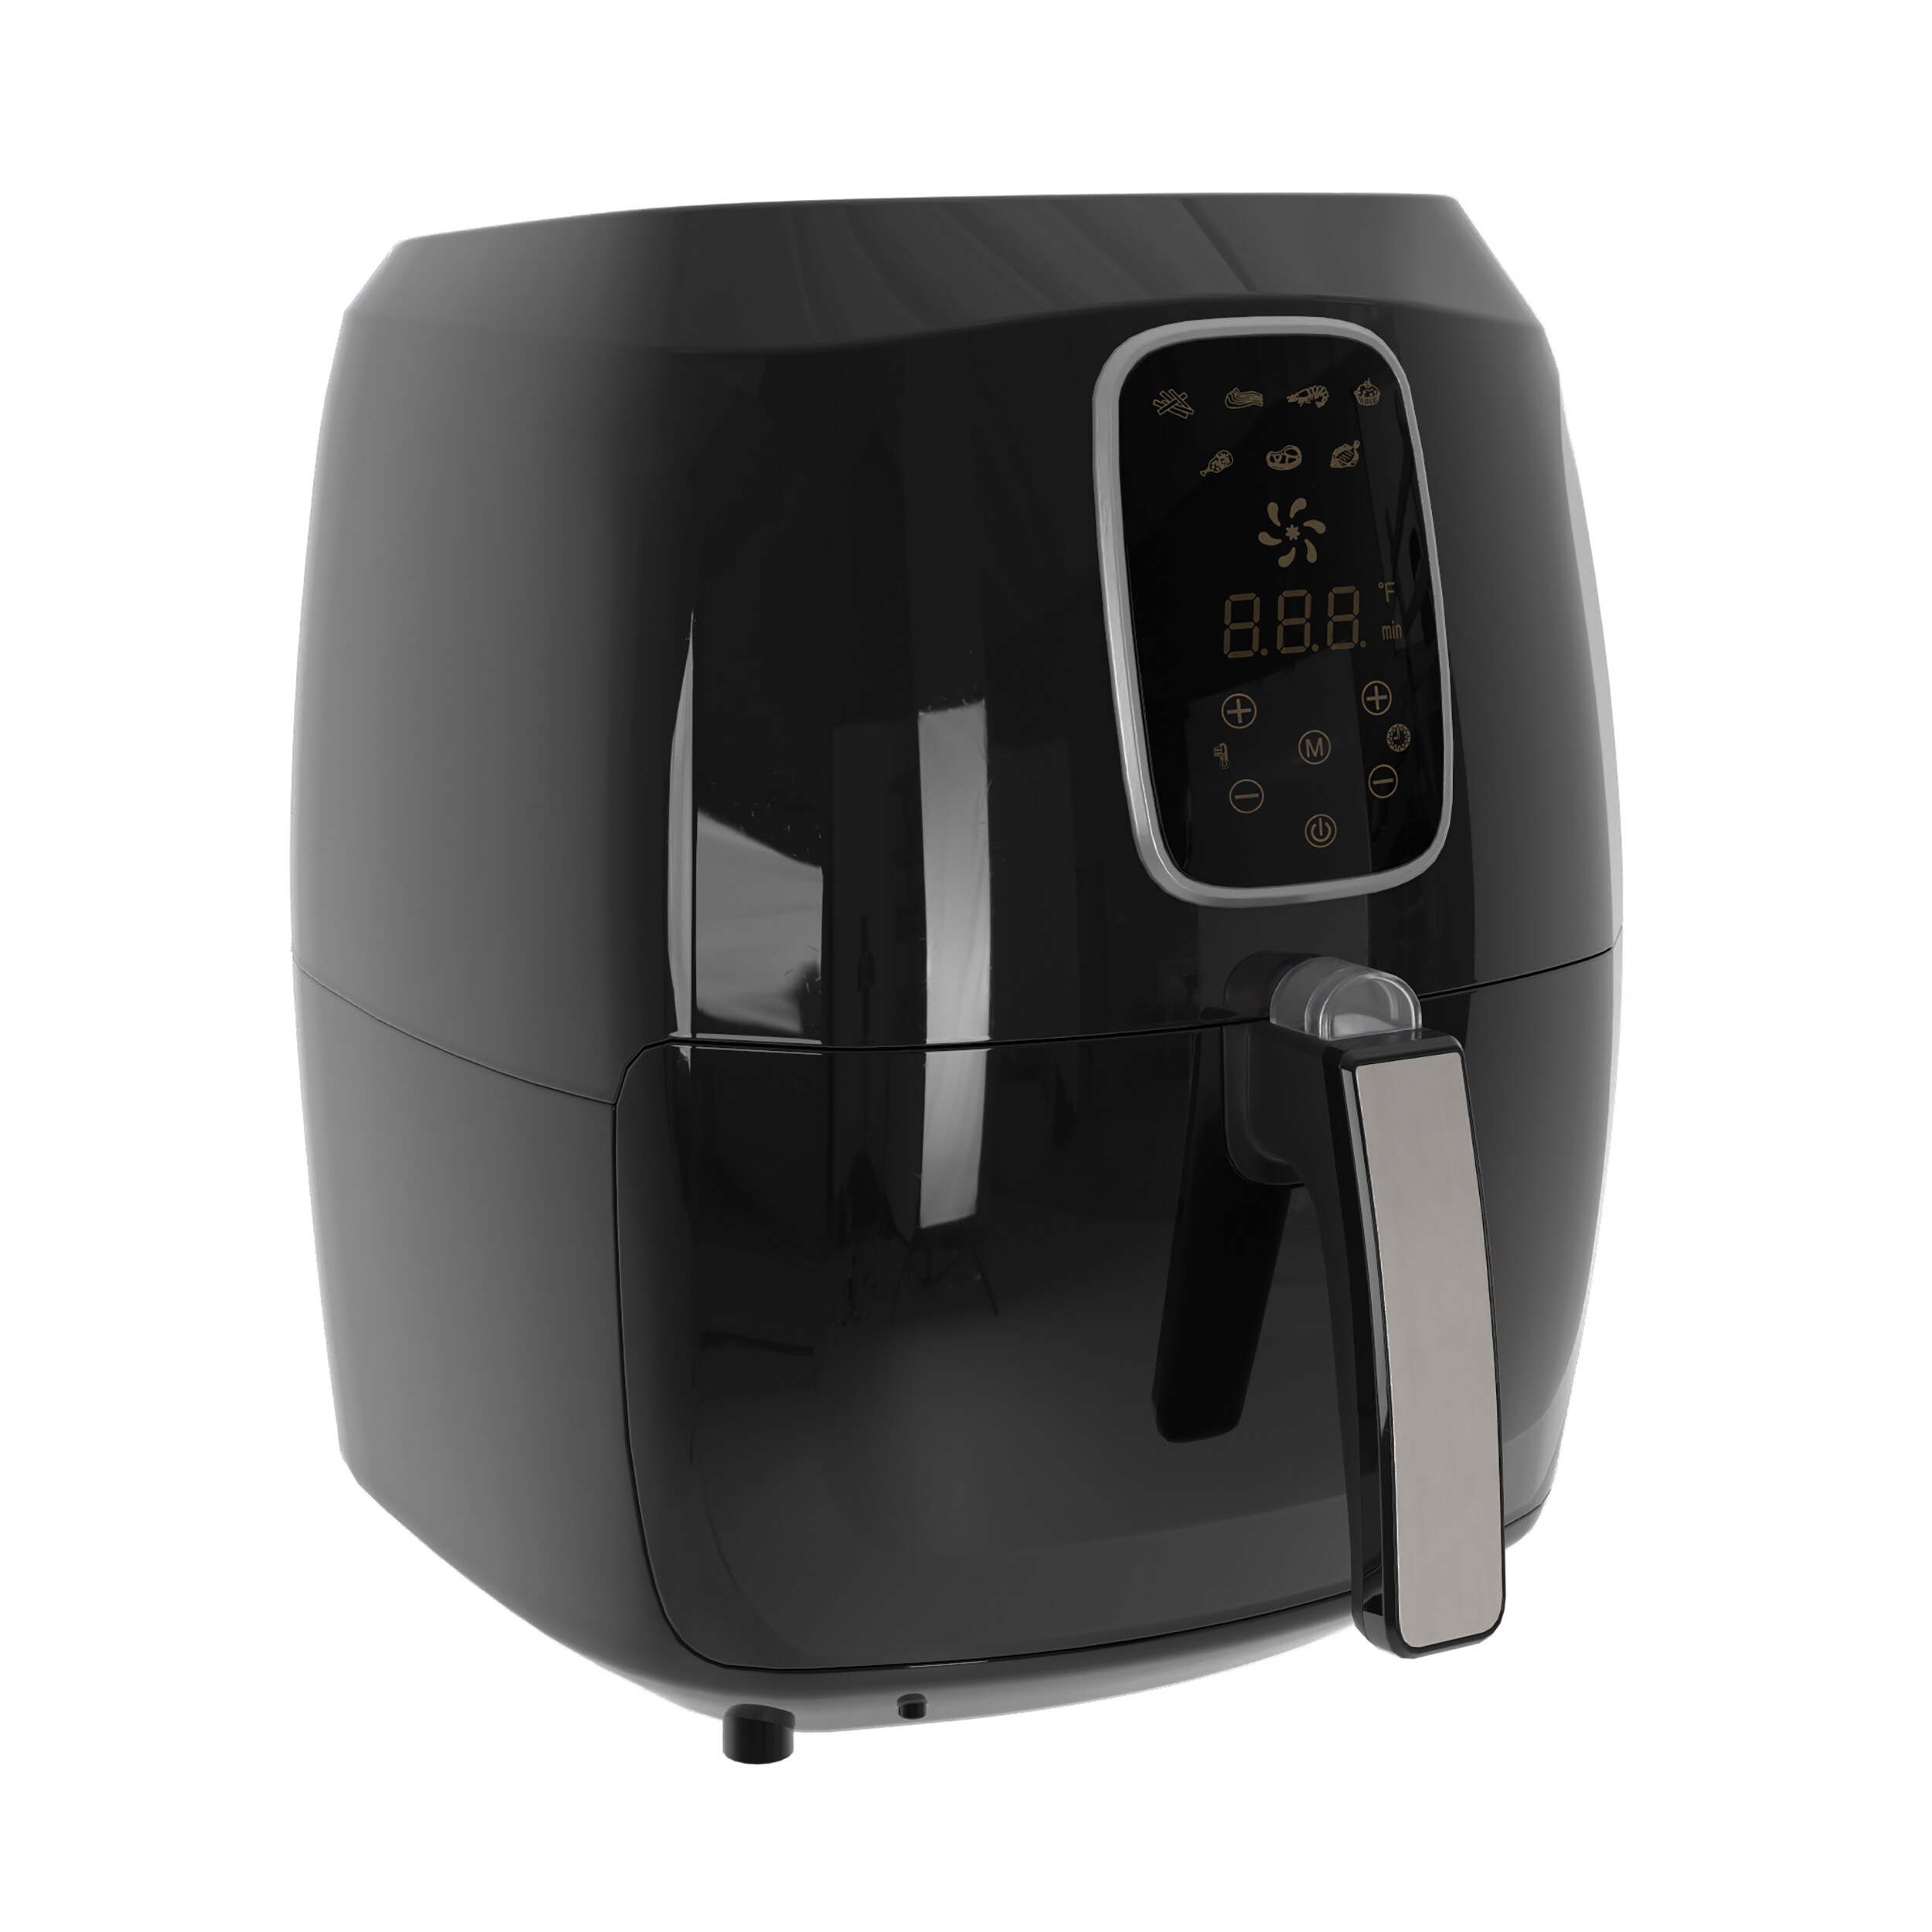 Emerald's 6.5-L. Air Fryer with auto-stirring paddle drops to $60 (Reg.  $88+)